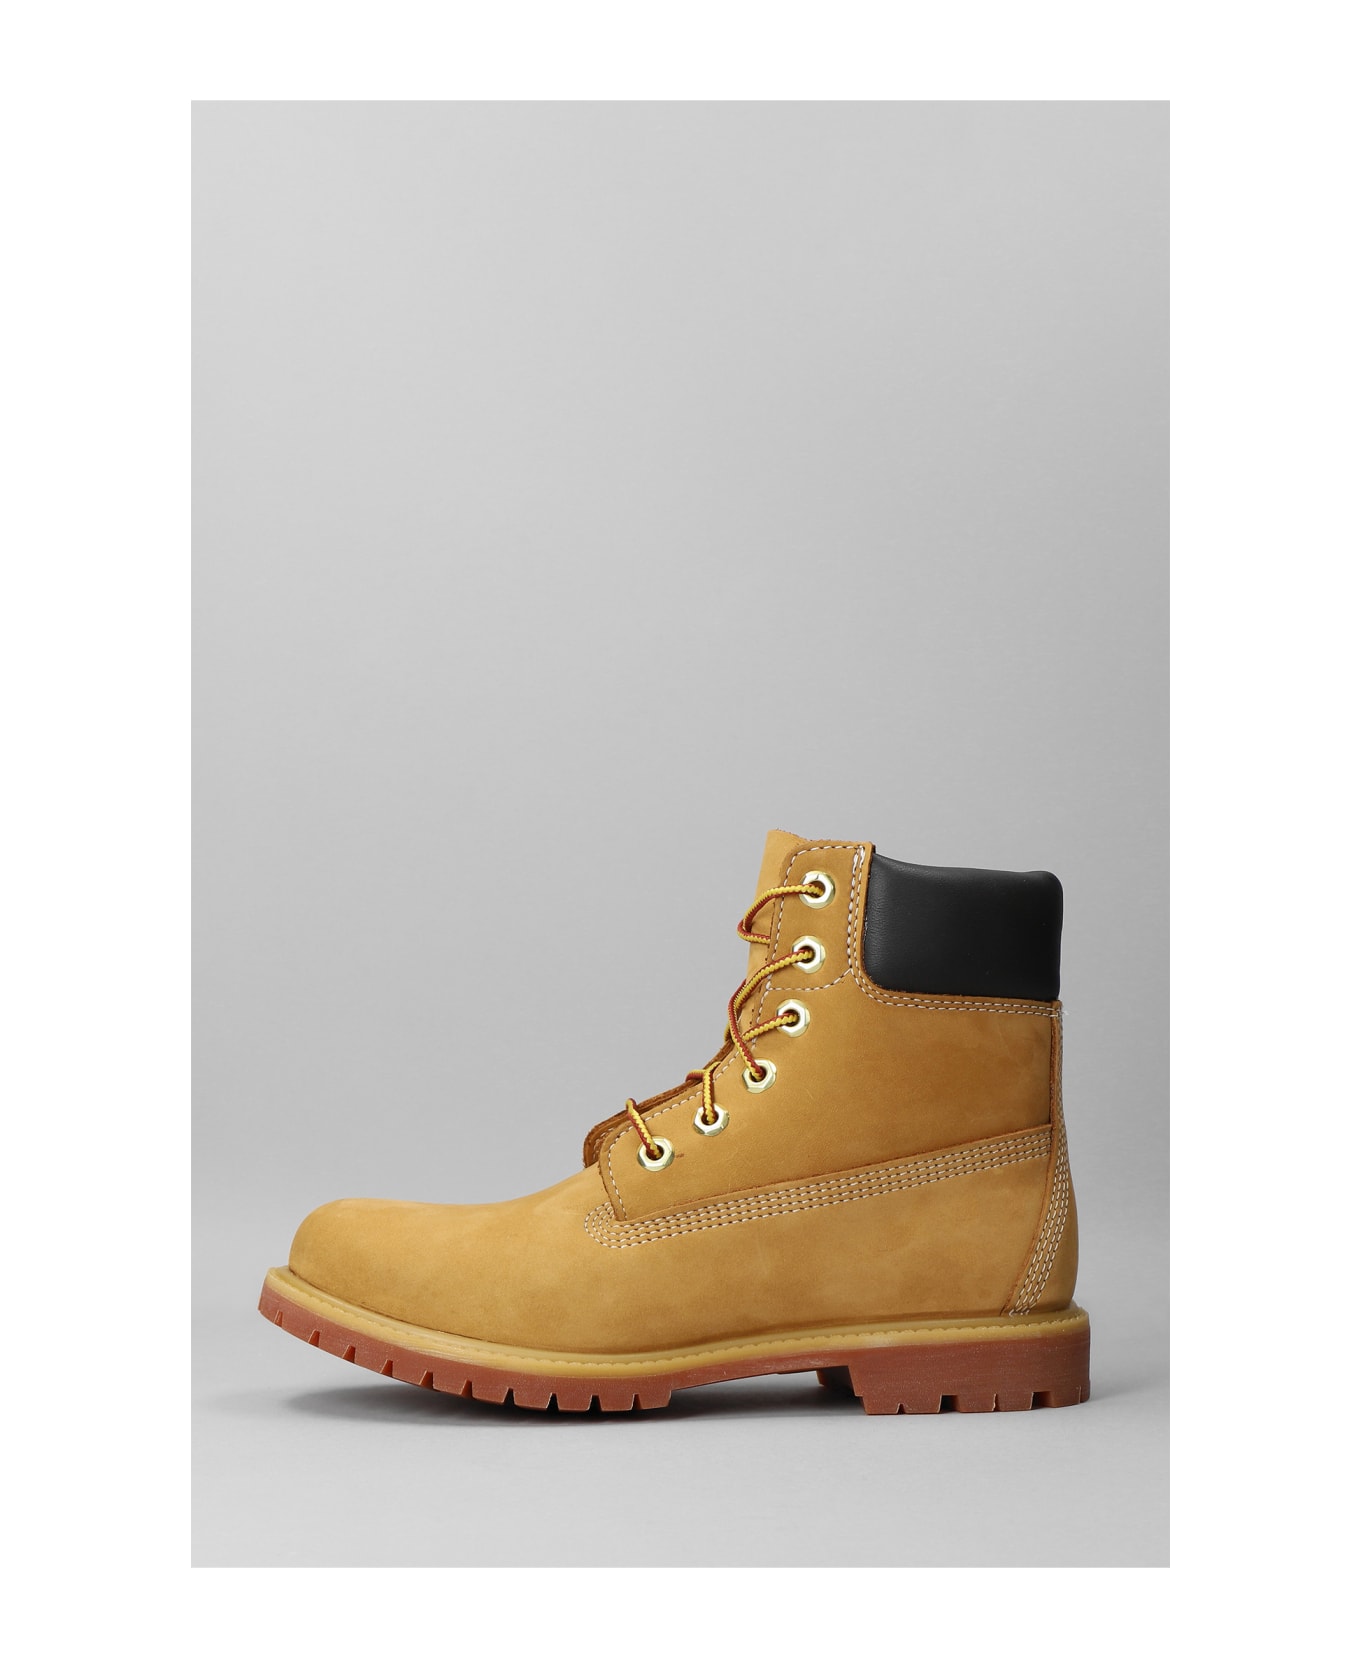 Timberland 6in Prem Combat Boots In Beige Suede - Brown ブーツ